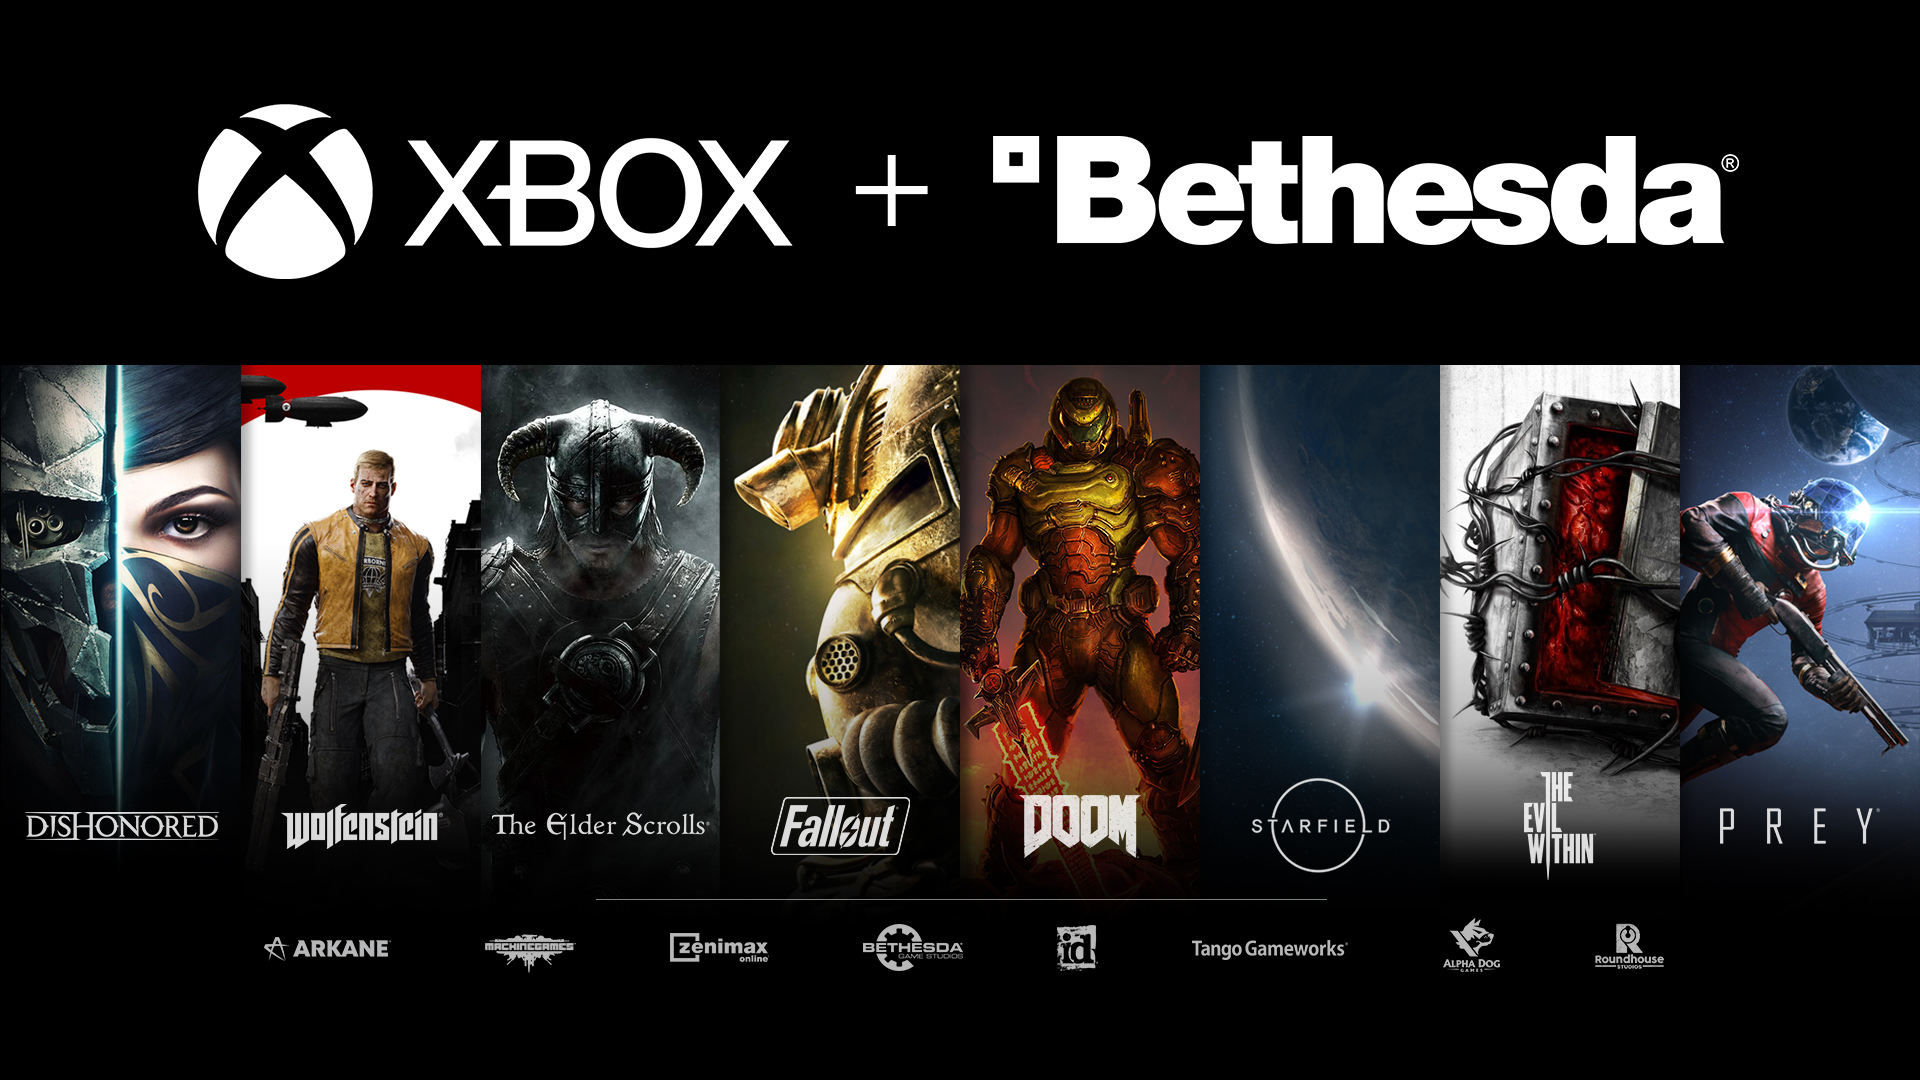 Microsoft Leak Included Roadmap For Unannounced Bethesda Games Including An  Oblivion Remaster, A Fallout 3 Remaster, Dishonored 3, & More - mxdwn Games